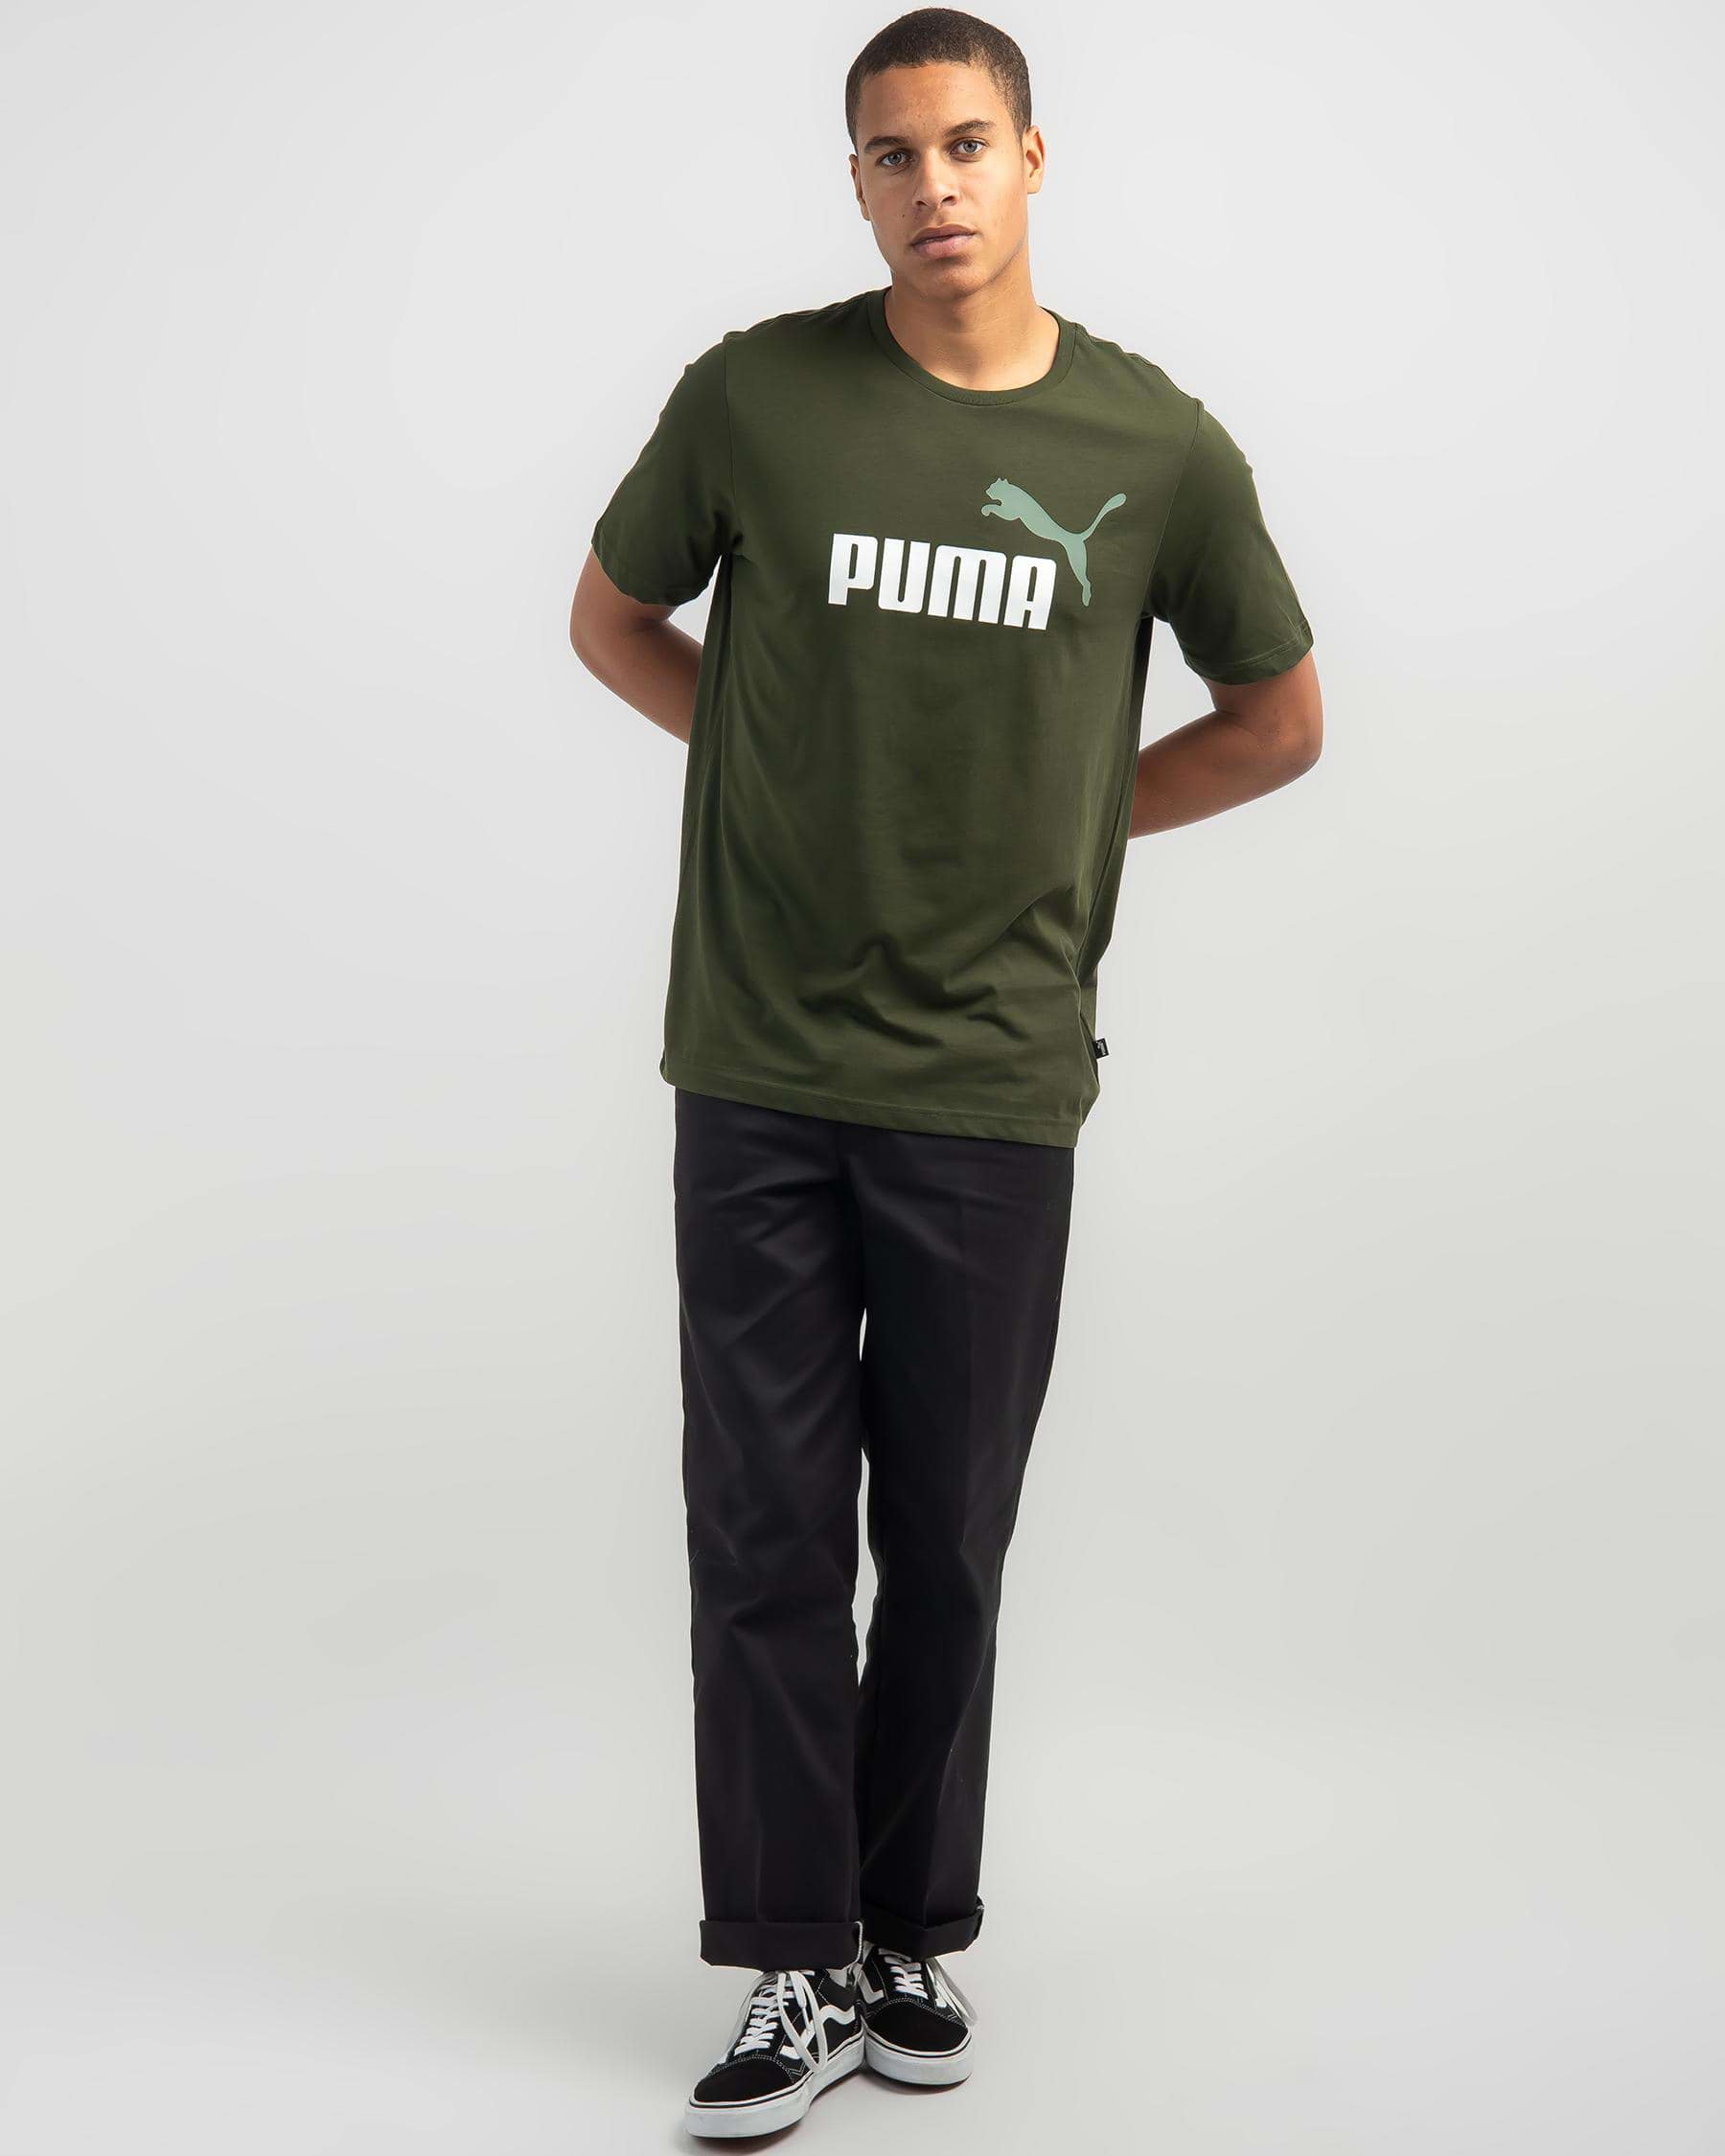 Logo FREE* ESS+2 Returns Easy States & Col United In - - Puma Myrtle City Shipping T-Shirt Beach